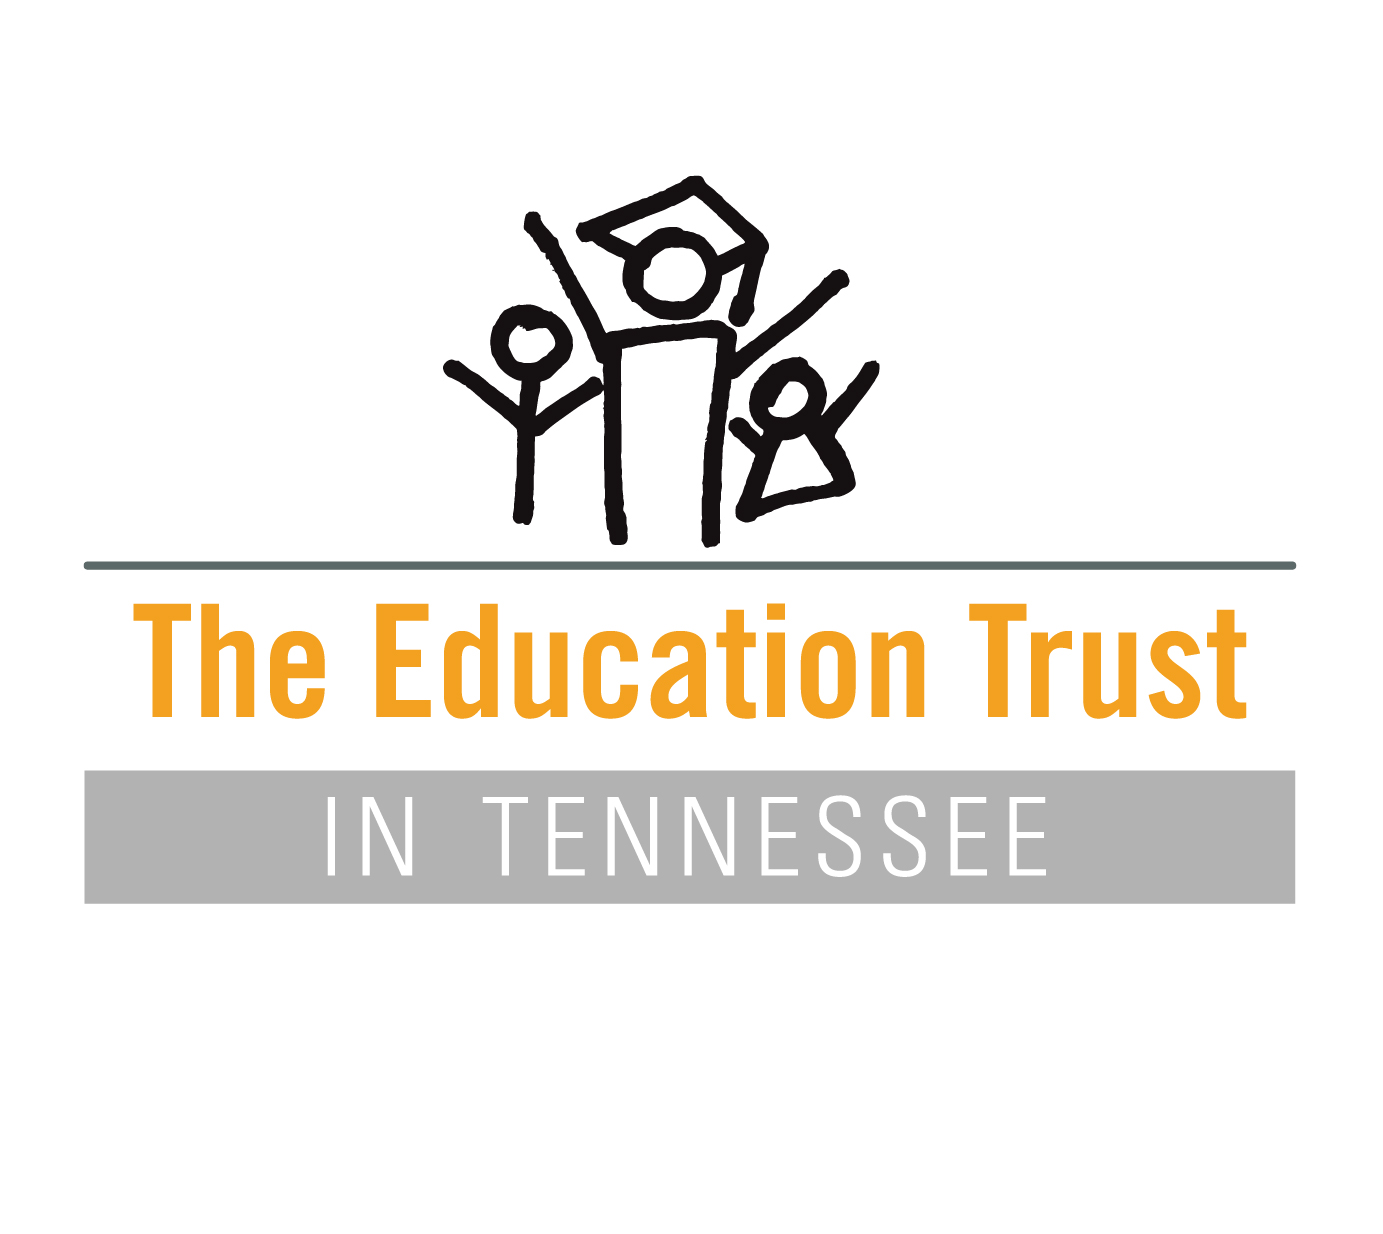 The Education Trust in Tennessee logo